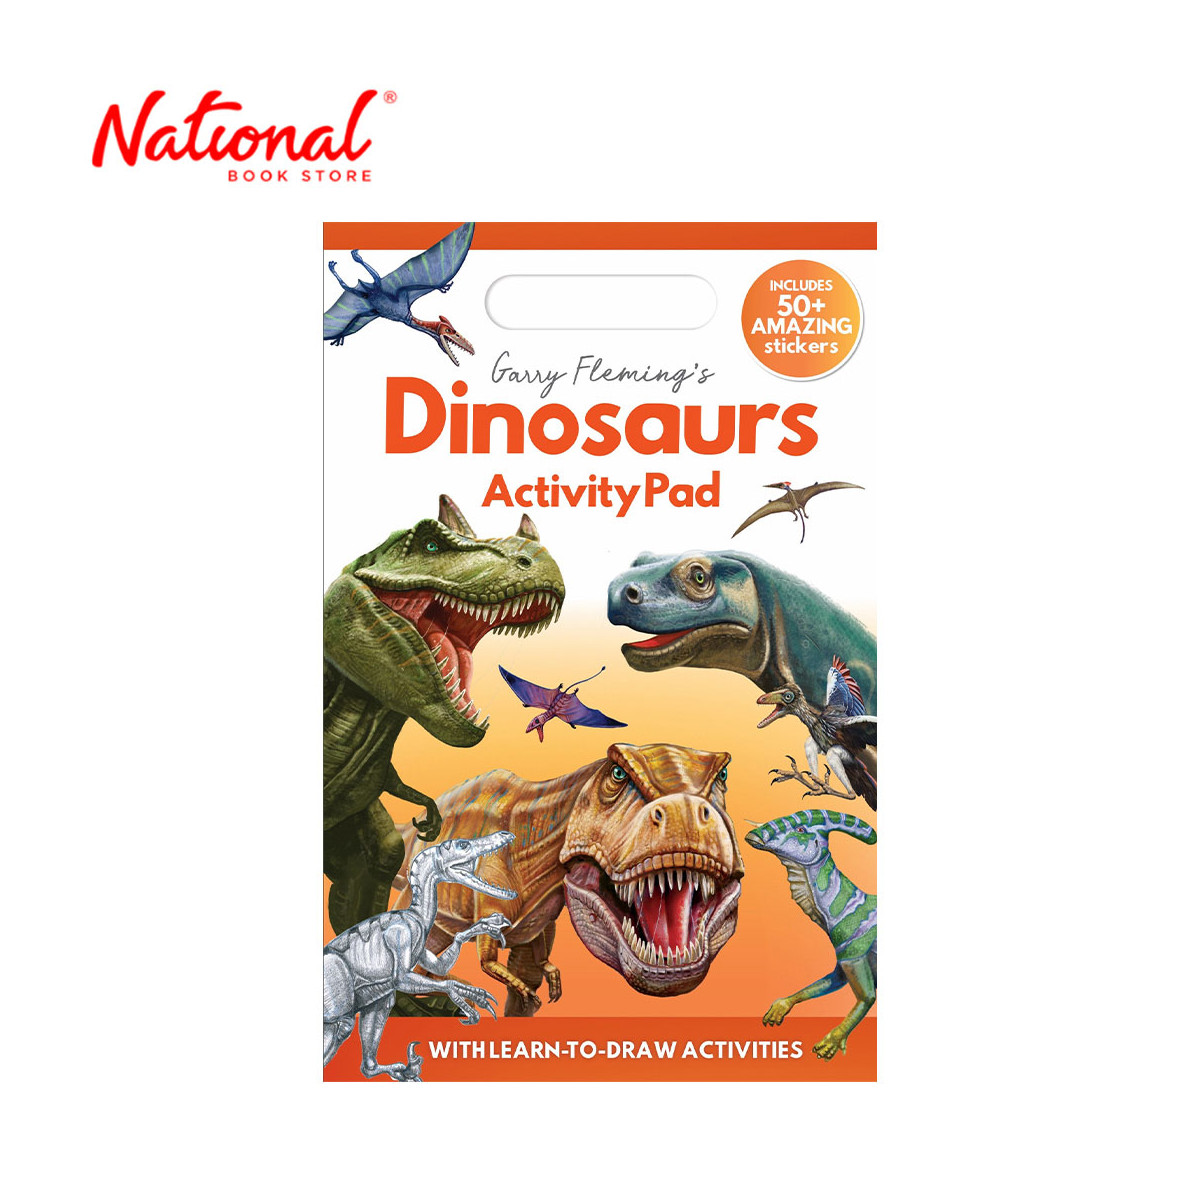 Garry Fleming's Dinosaurs Activity Pad By Garry Fleming - Trade Paperback - Activity Books for Kids